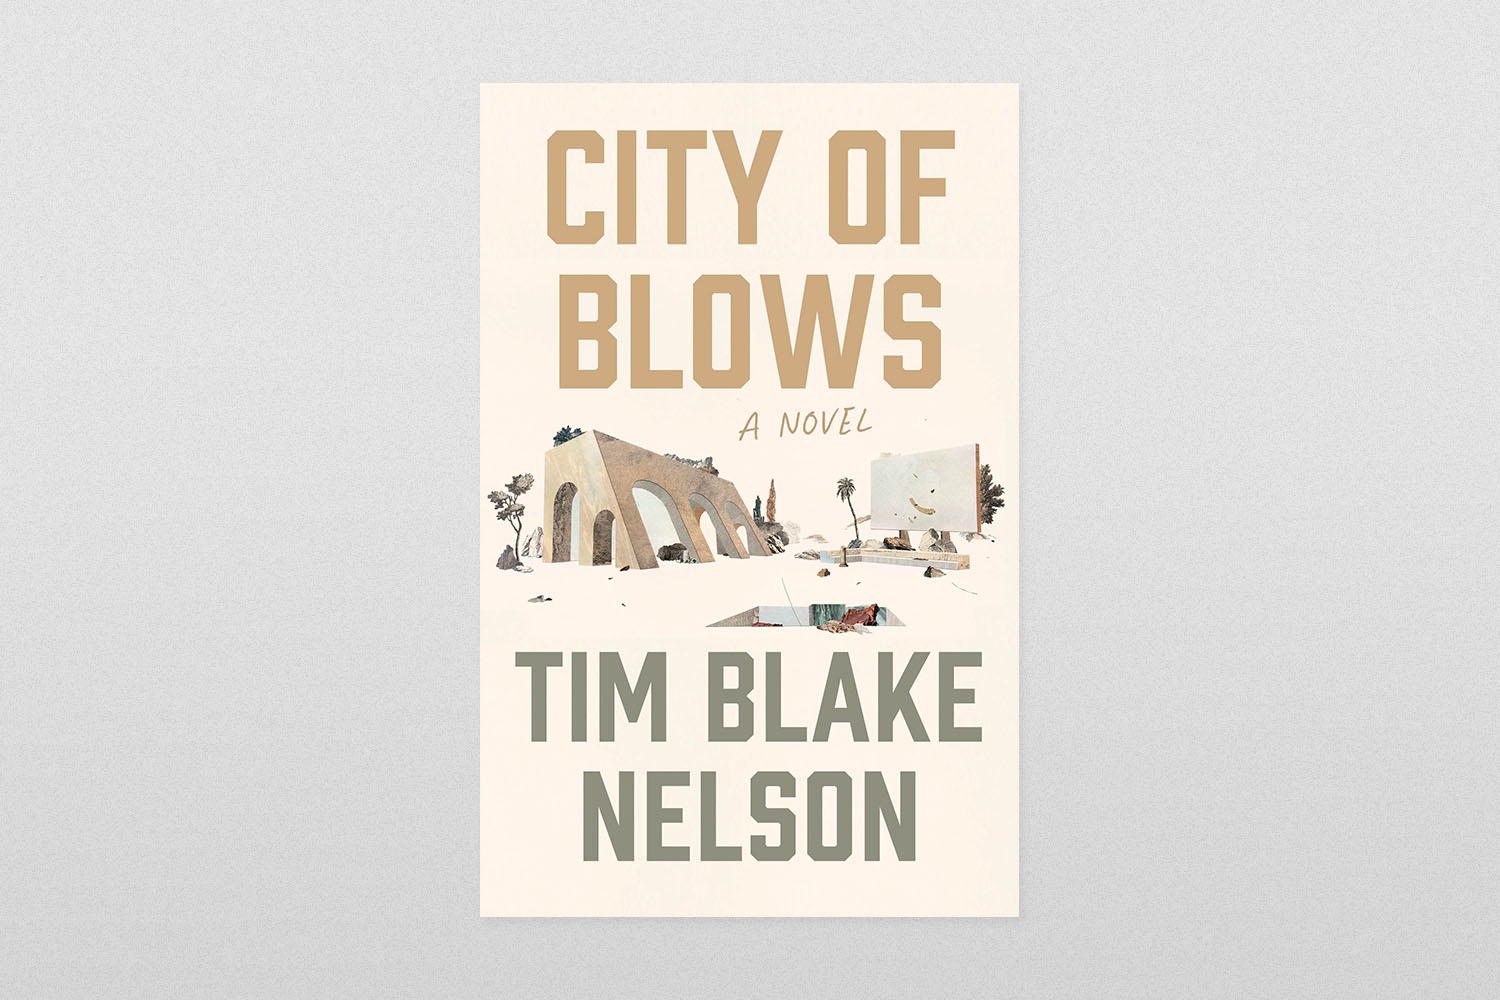 City of Blows by Tim Blake Nelson